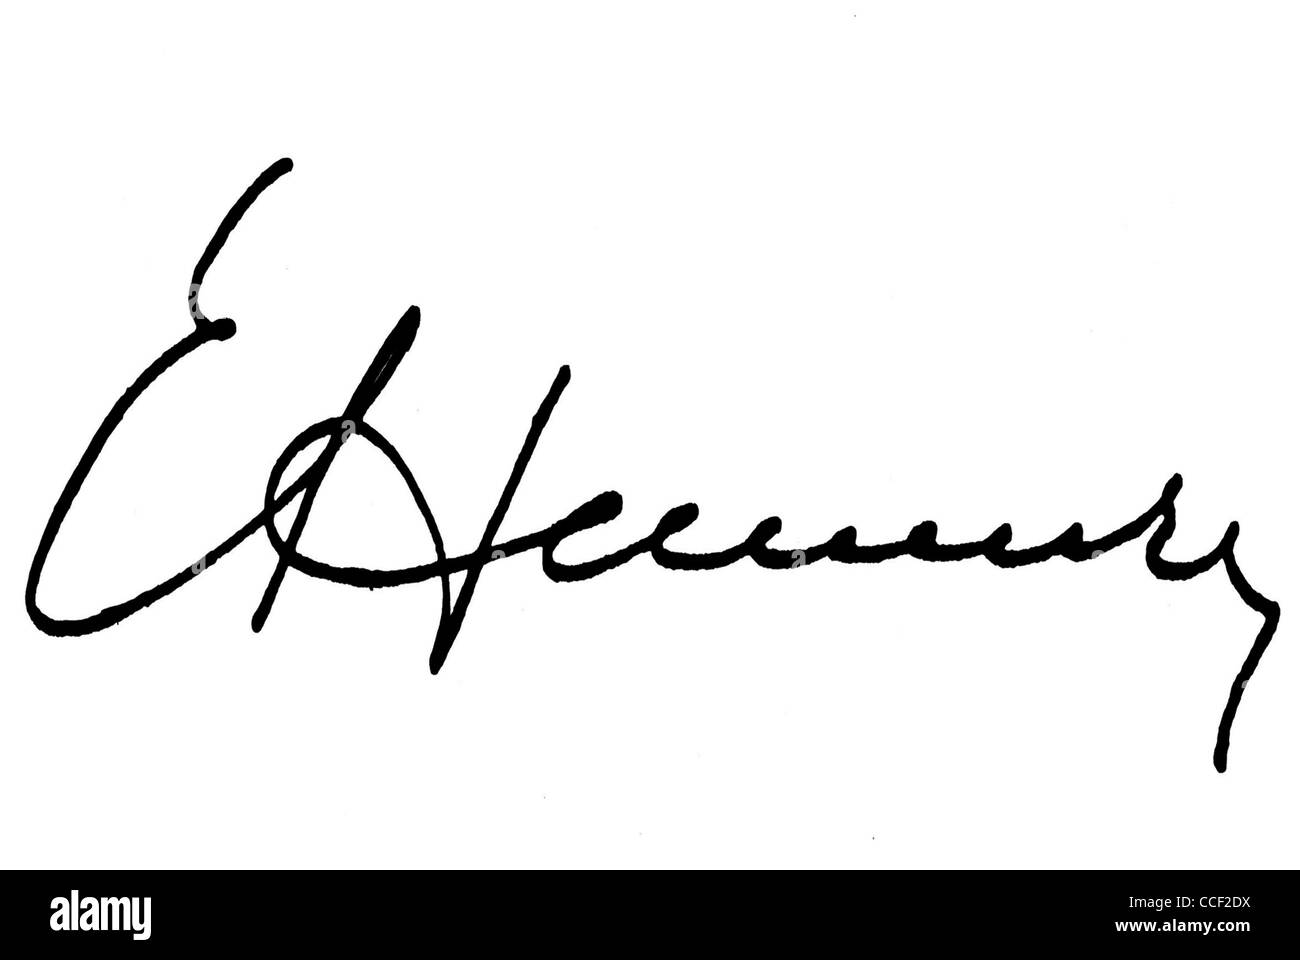 Signature of Erich Honecker - Secretary General of the SED and Chairman of the Council of state of the GDR 1971 - 1989. Stock Photo